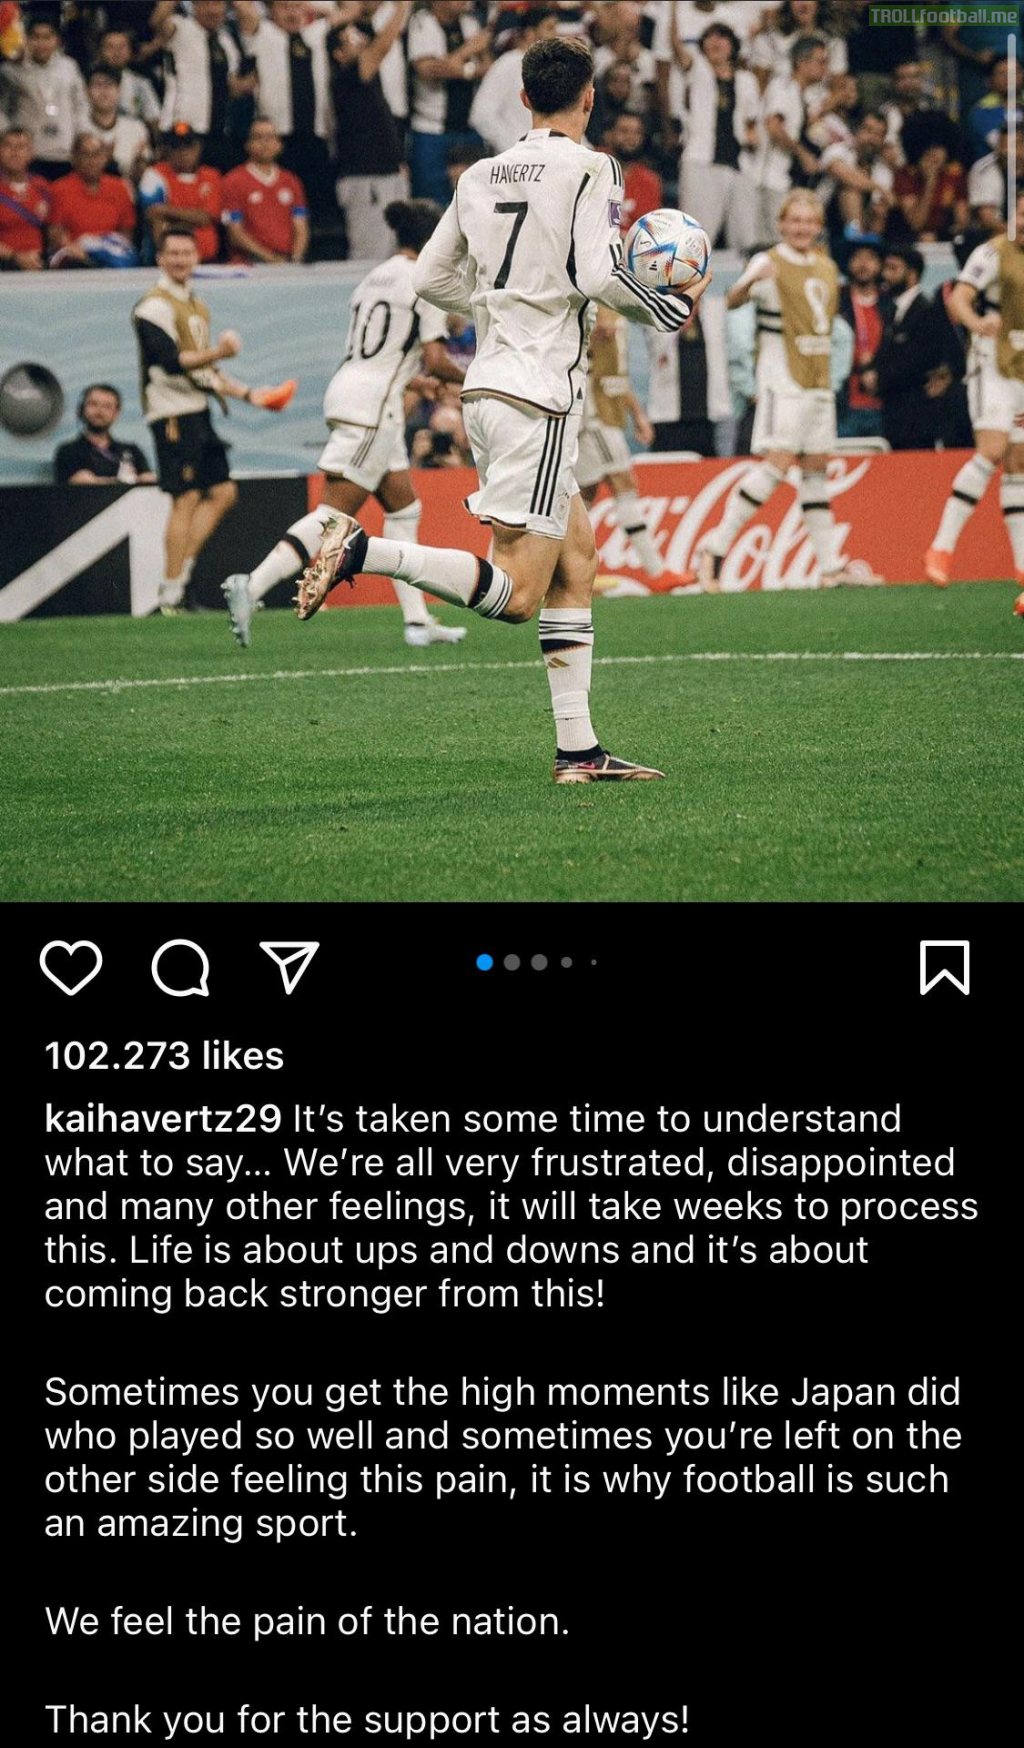 Kai Havertz on Instagram: It’s taken some time to understand what to say… We’re all very frustrated, disappointed and many other feelings, it will take weeks to process this. Life is about ups and downs and it’s about coming back stronger from this! 1/2